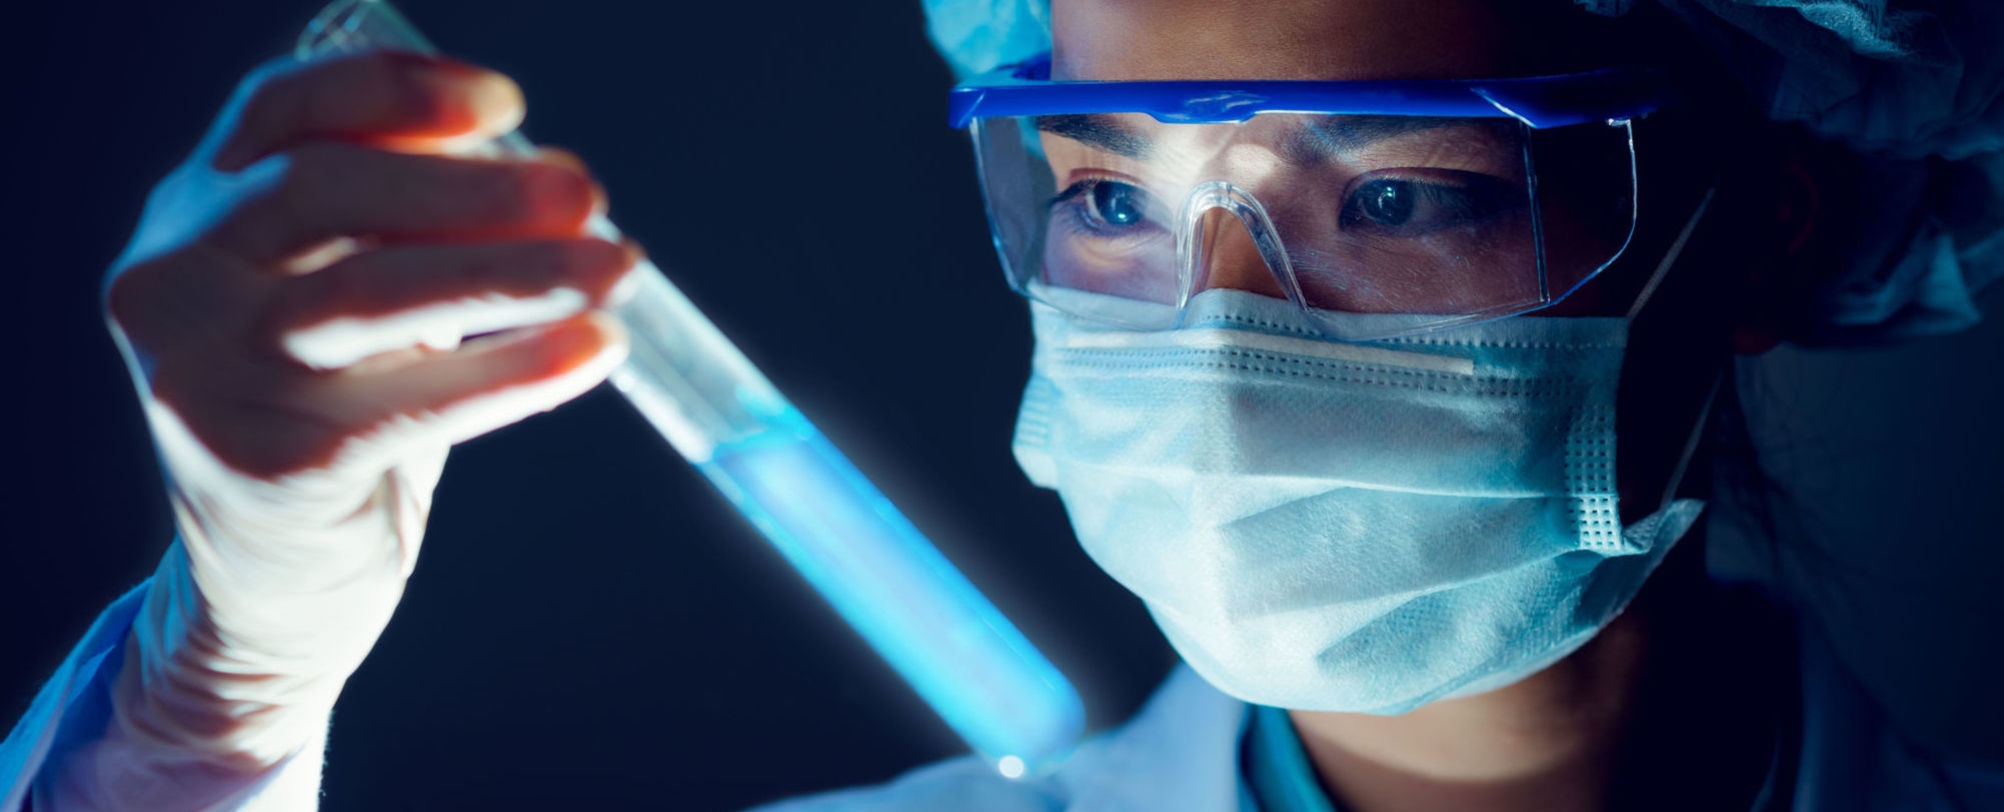 Harrington Discovery Institute Accelerates Breakthrough Science into Cancer Treatments and Cures. Harrington Advances Science to Medicine through Philanthropy. The image portrays a female scientist in a lab coat, mask and goggles looking at a science test-tube. .